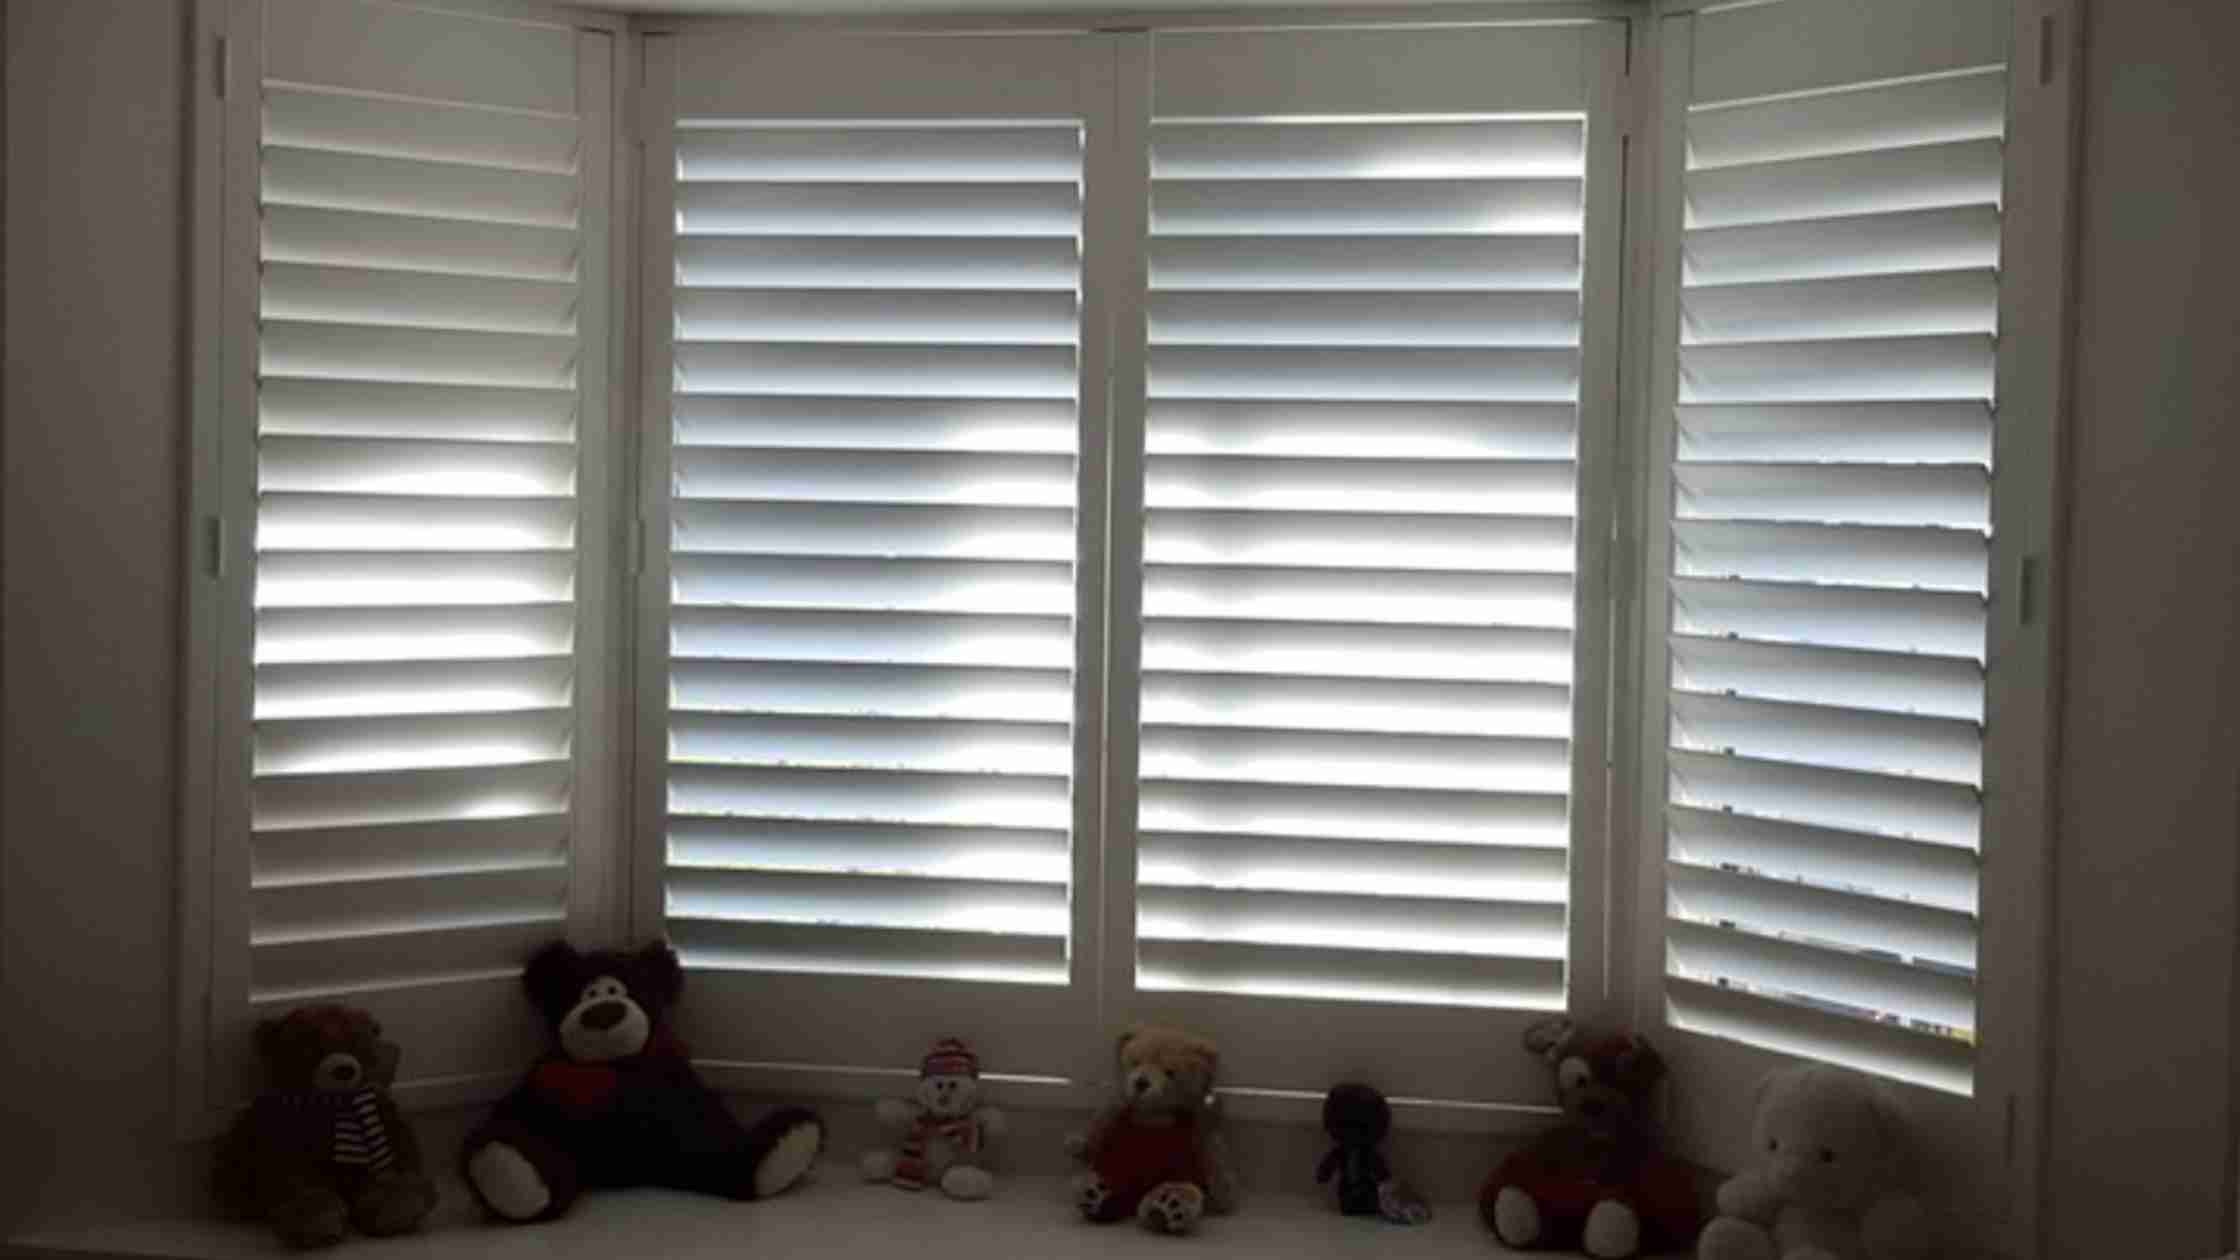 What Are The Influential Cost Factors For Shutters?